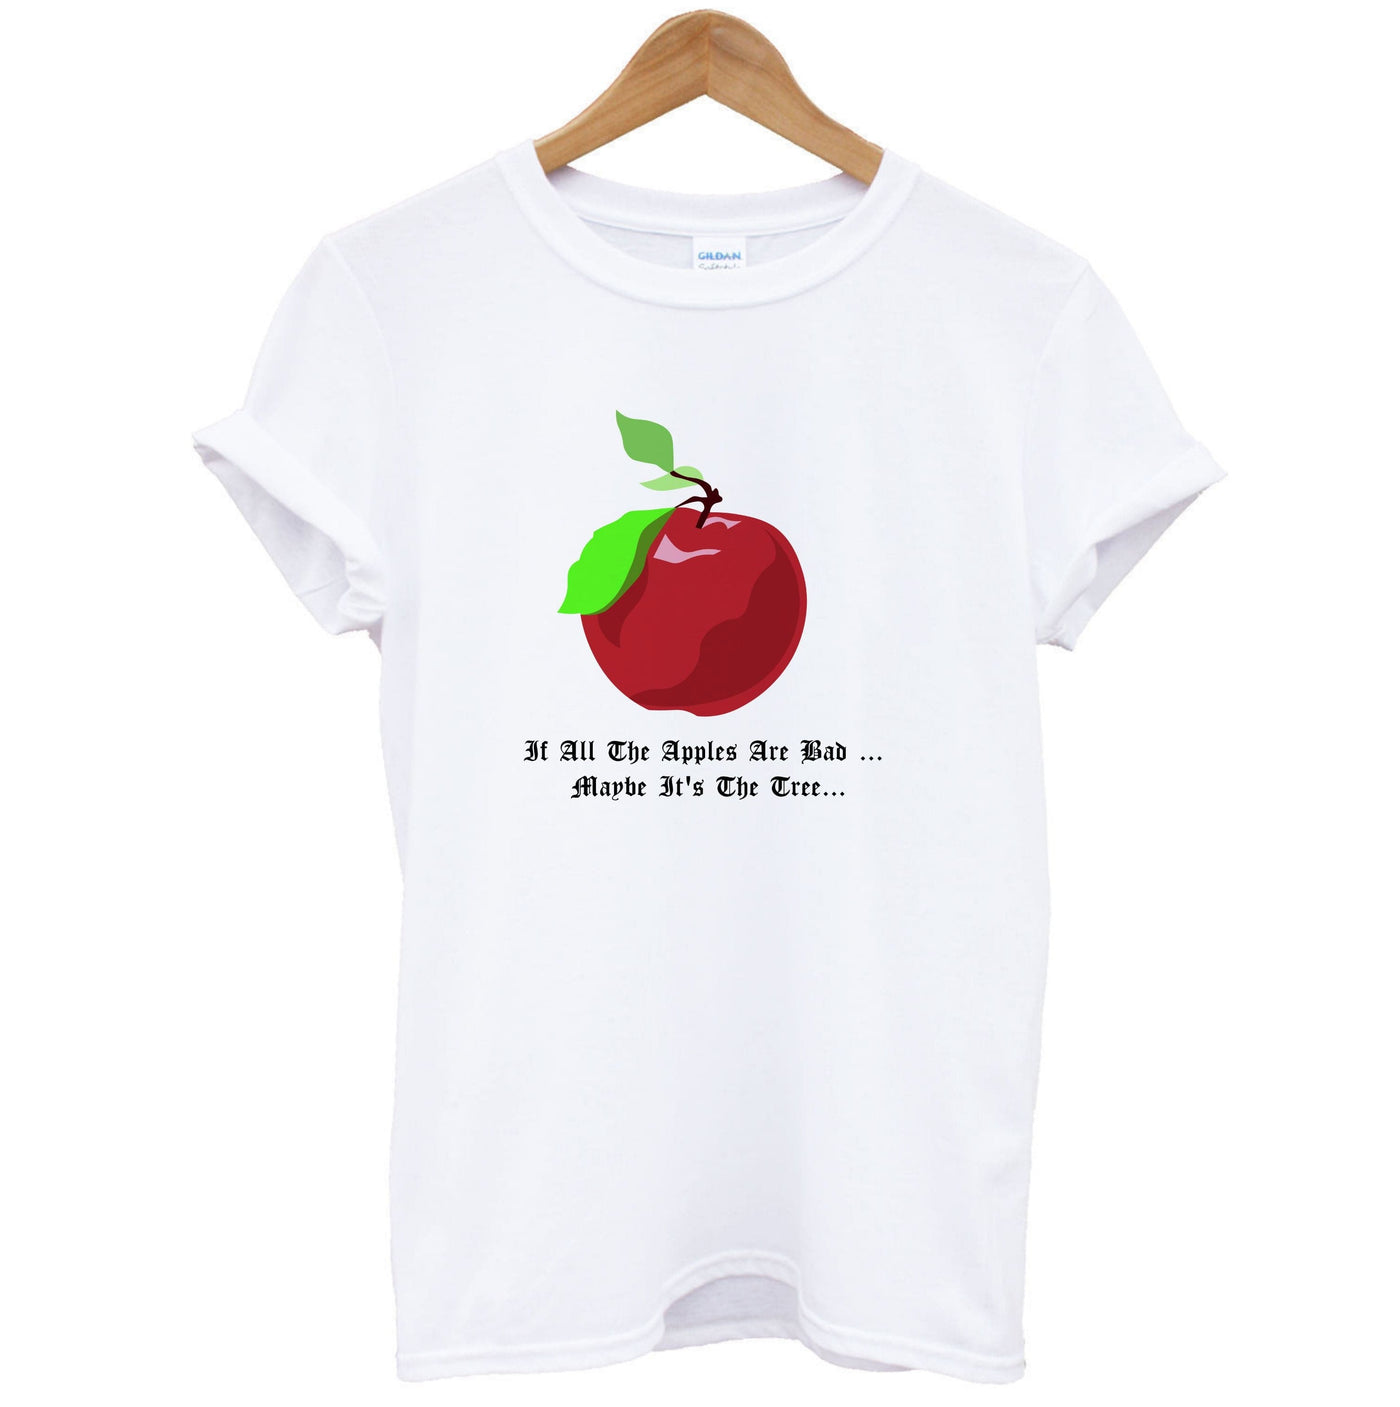 If All The Apples Are Bad - Lucifer T-Shirt